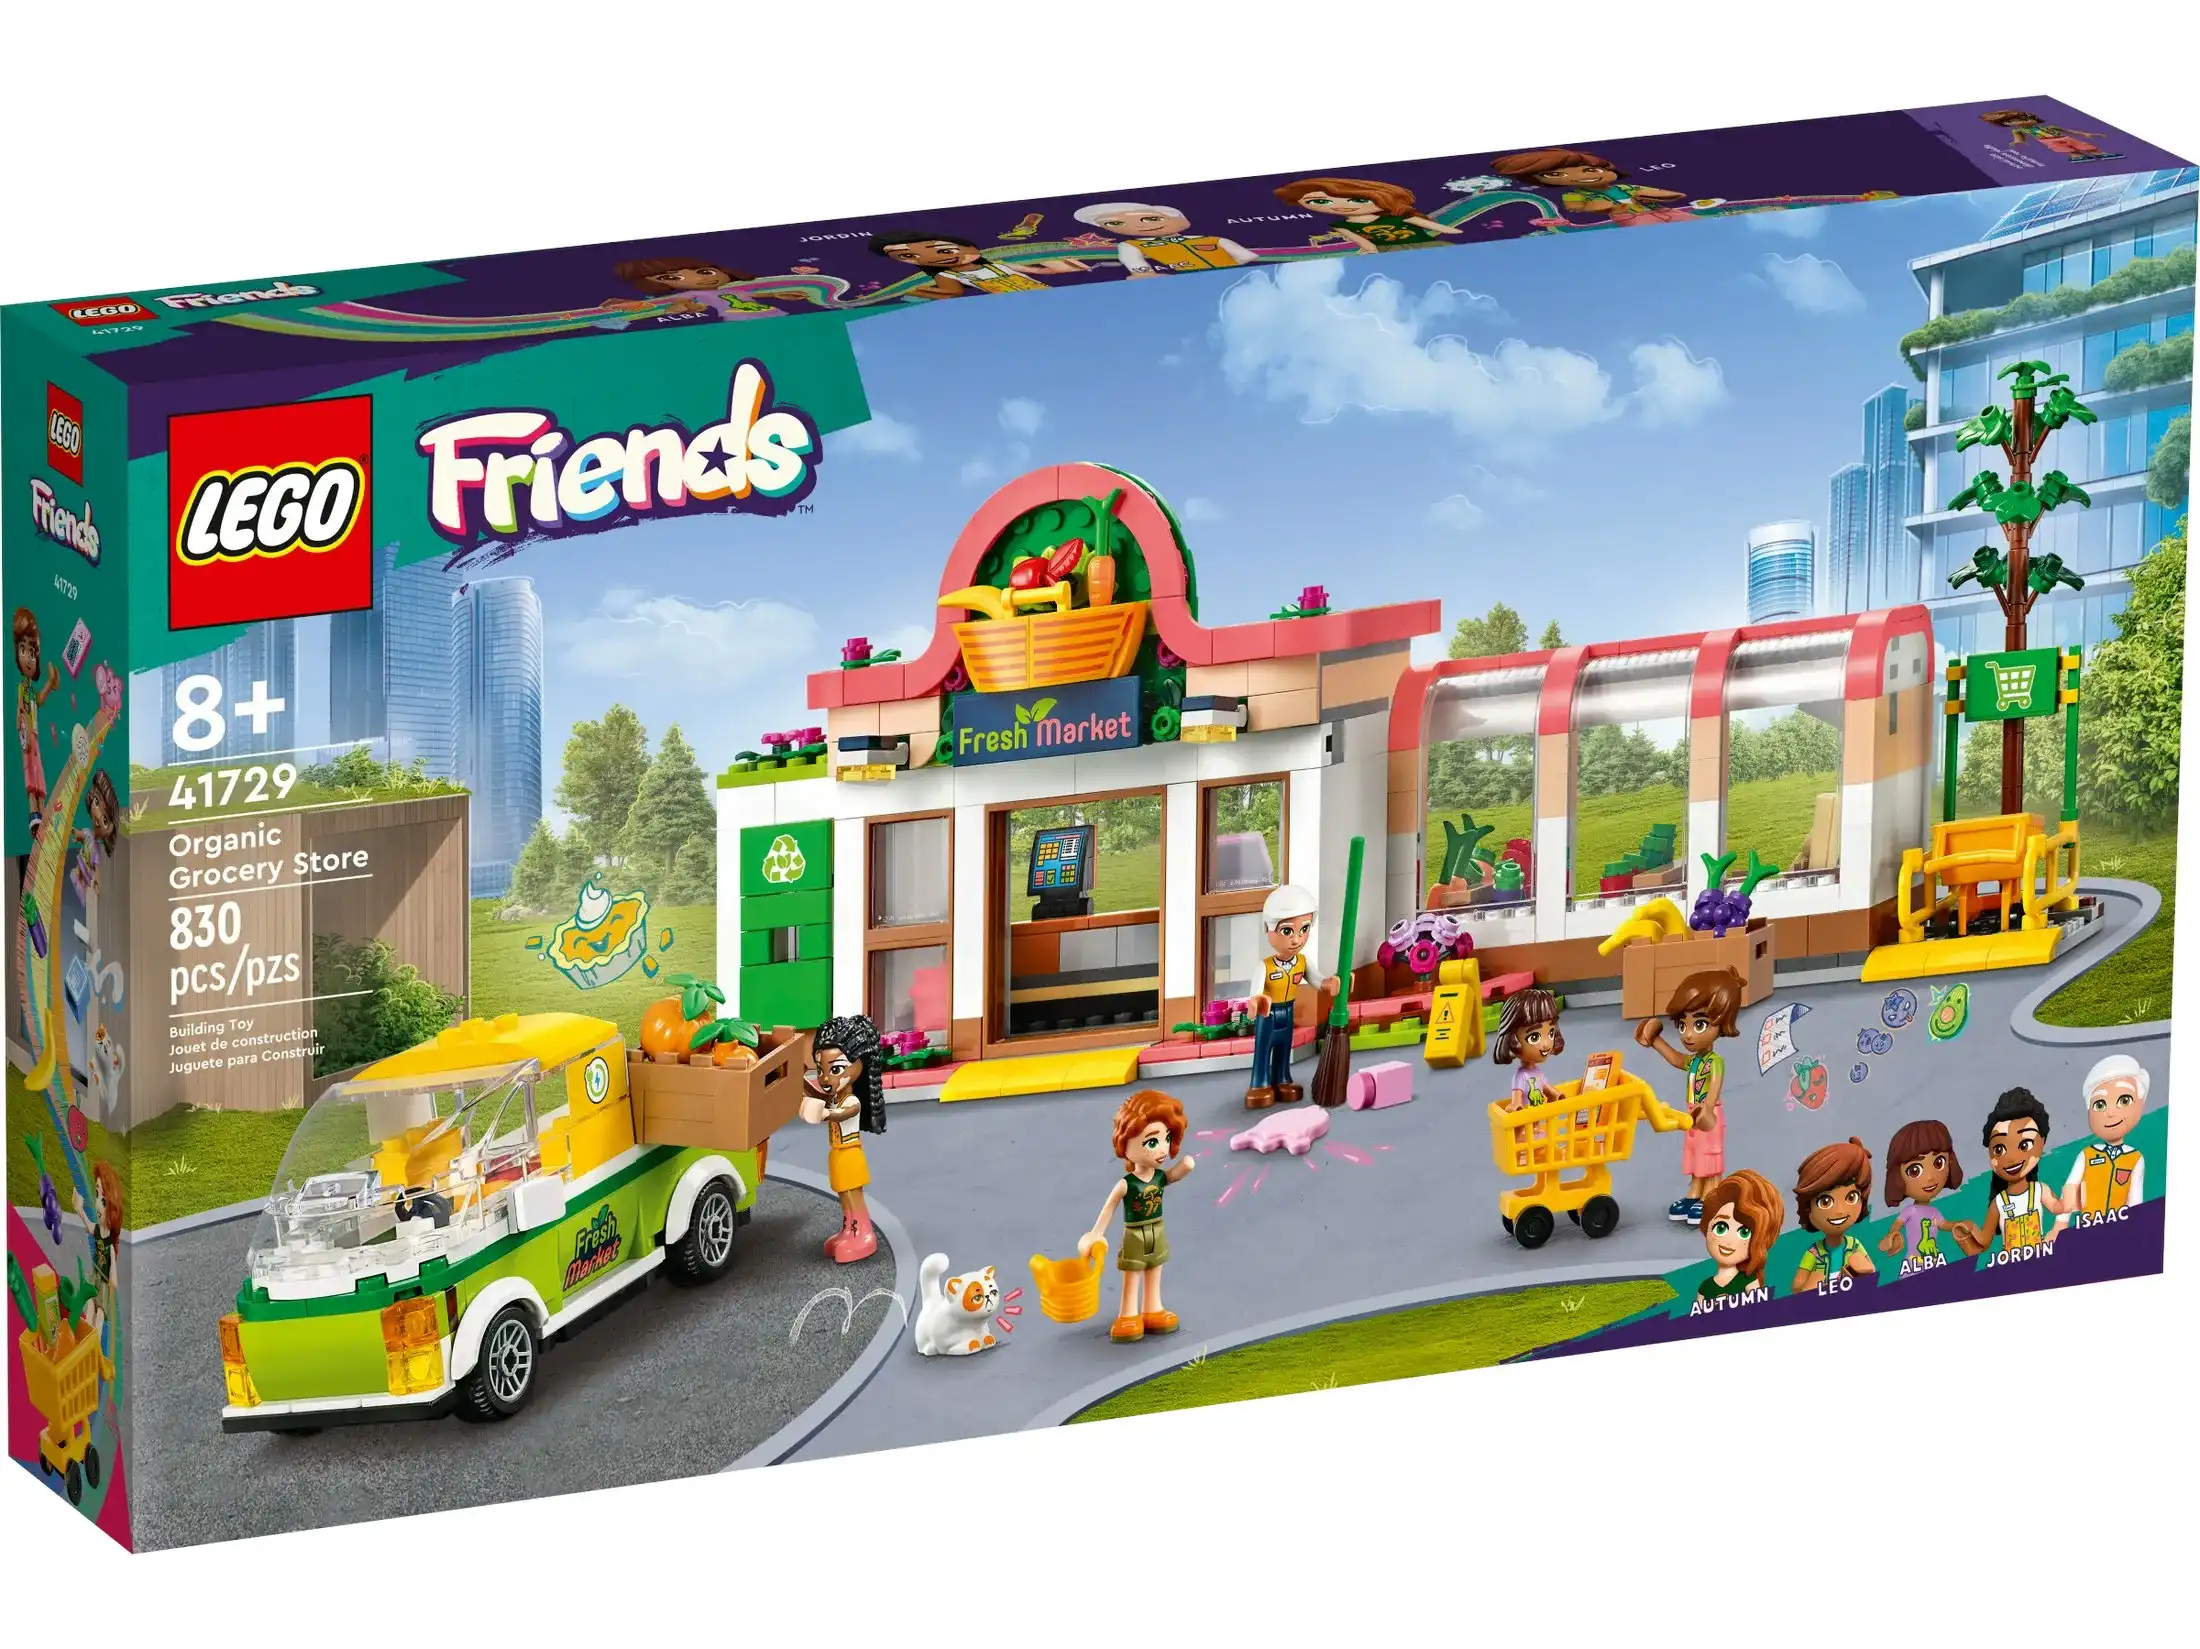 LEGO 41729 Organic Grocery Store - Friends